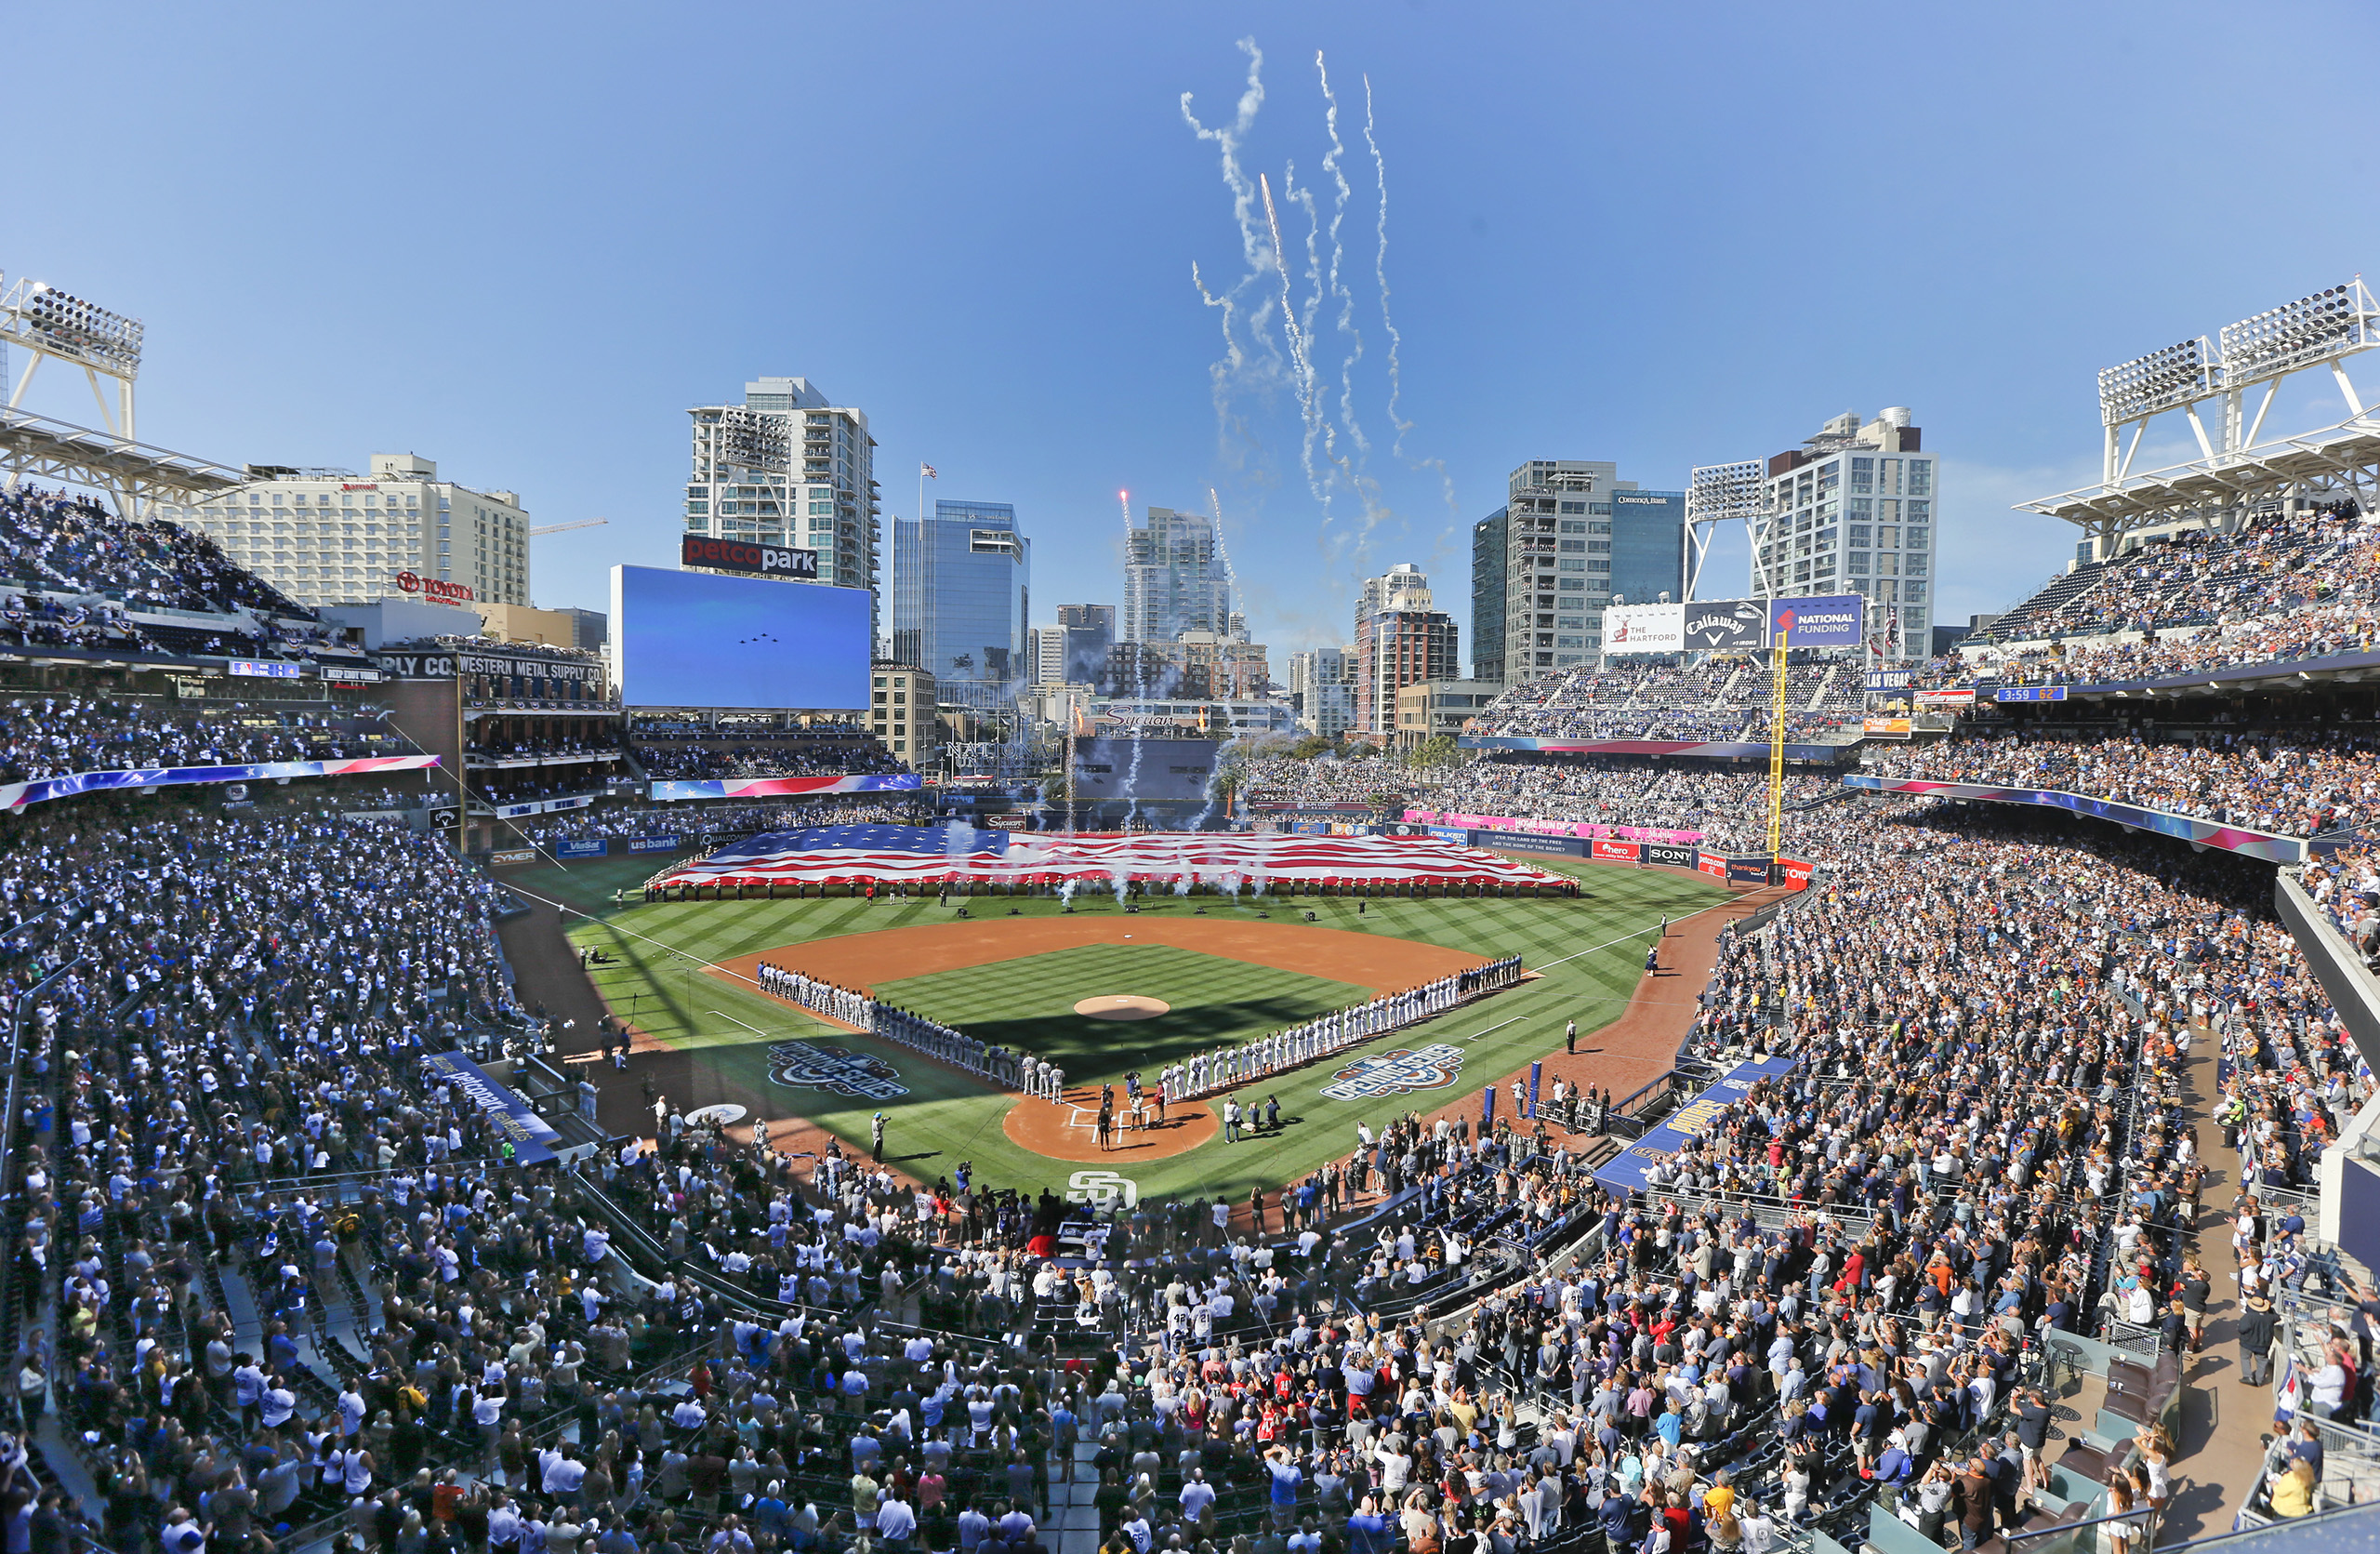 Opening day ceremonies are performed at Petco Park before a baseball game between the Los Angeles Dodgers and the San Diego Padres in San Diego, April 4, 2016. (Lenny Ignelzi—AP)